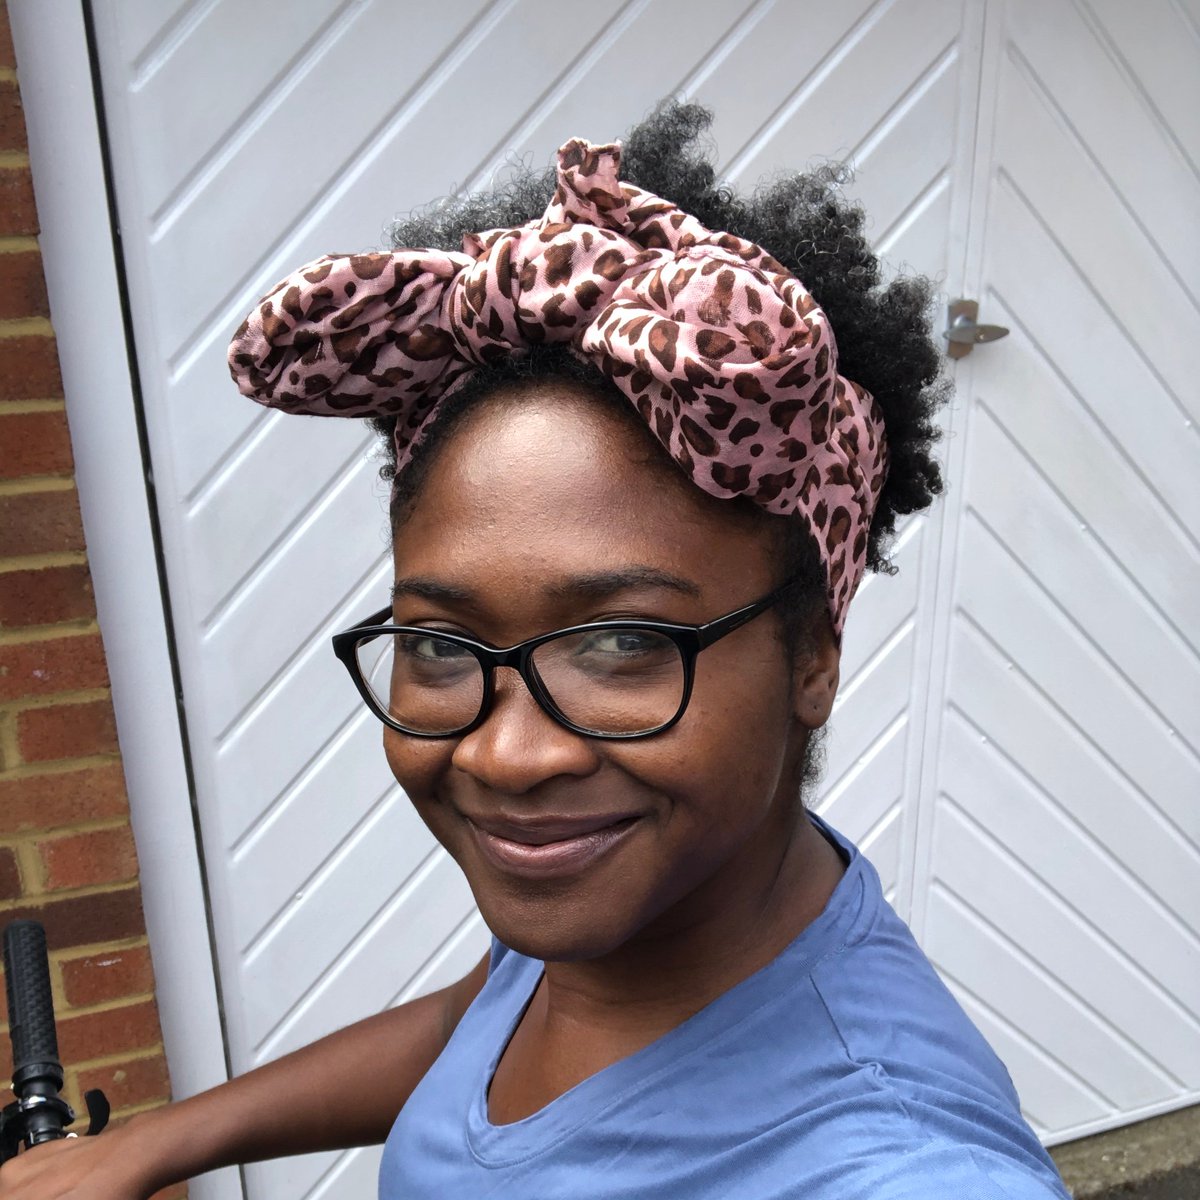 Profiling women at Oxford Uni contributing great science to tackle the COVID pandemic.#1: Ane Ogbe -post doctoral scientist. Developing proliferation assays against SARS-CoV2 antigens-key to understanding T cell memory and cross-reactivity. Watch this space!  @UniofOxford